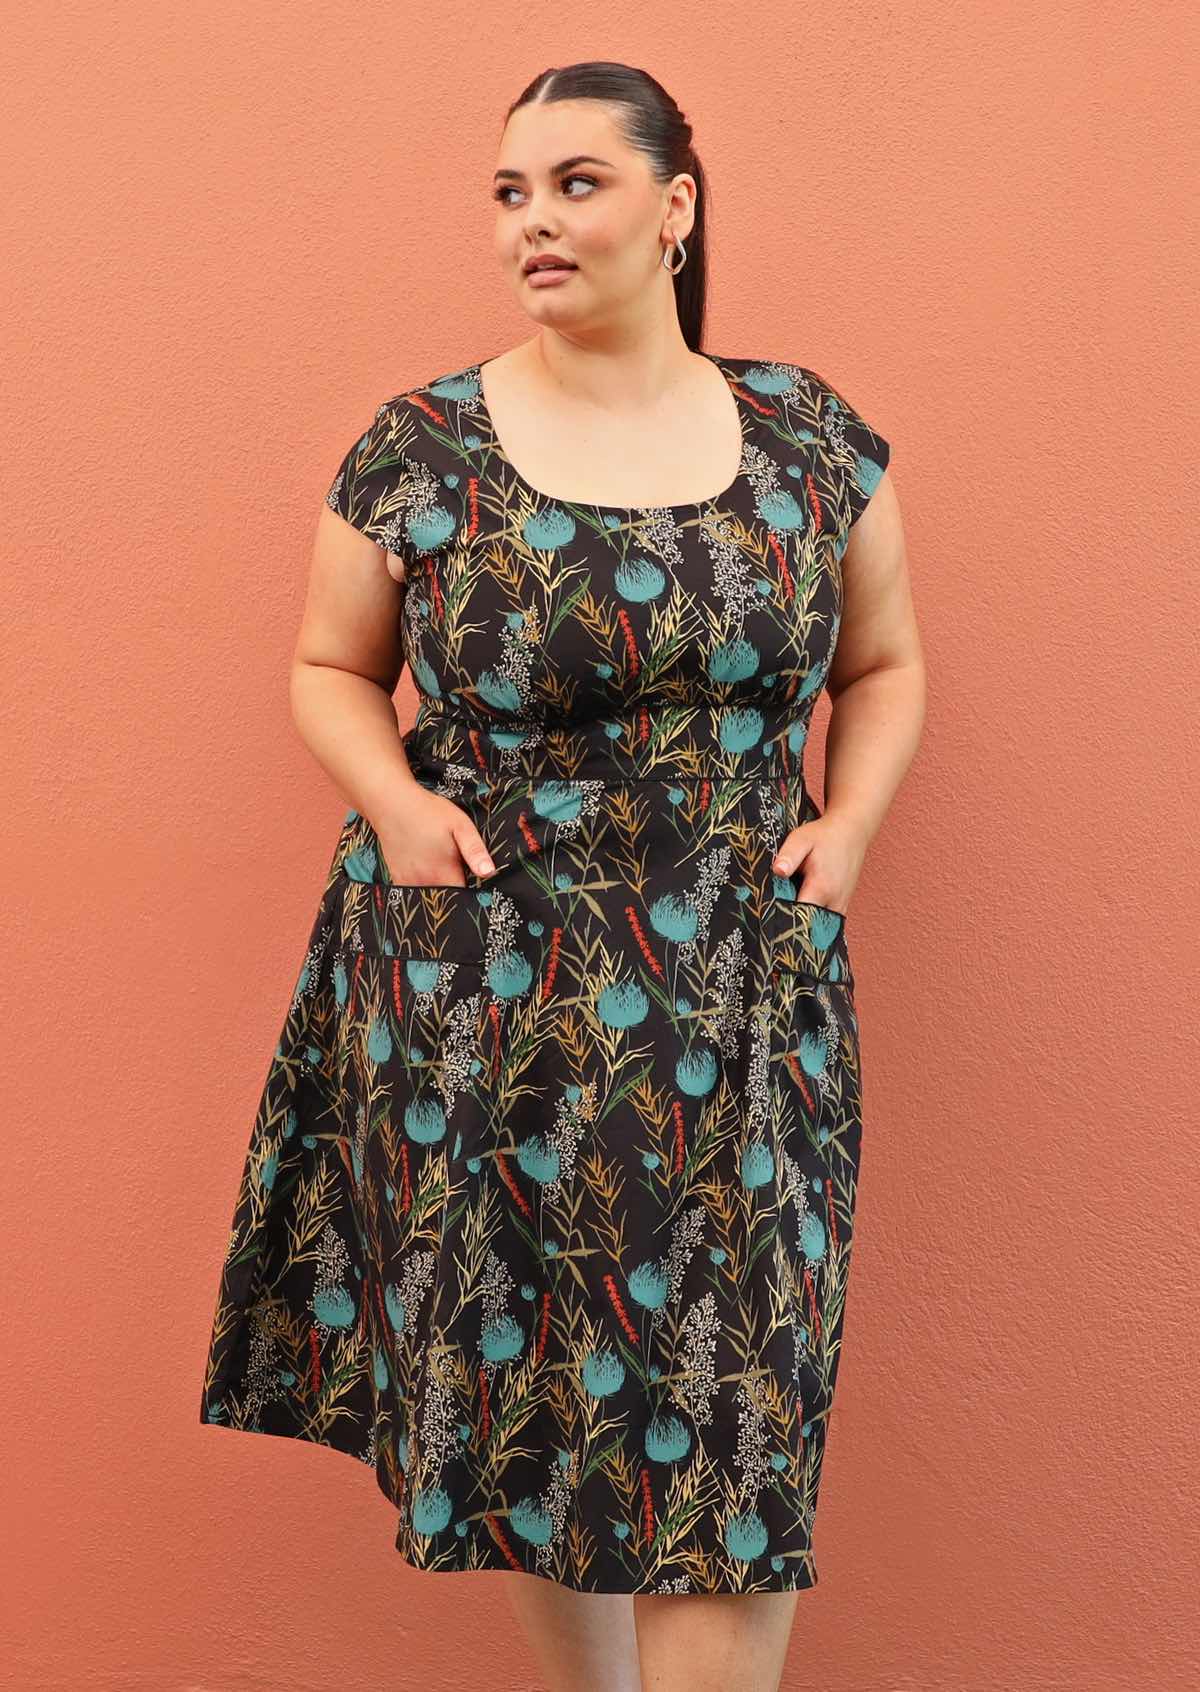 Plus size model wearing retro style cotton dress in black and teal with scoop neck